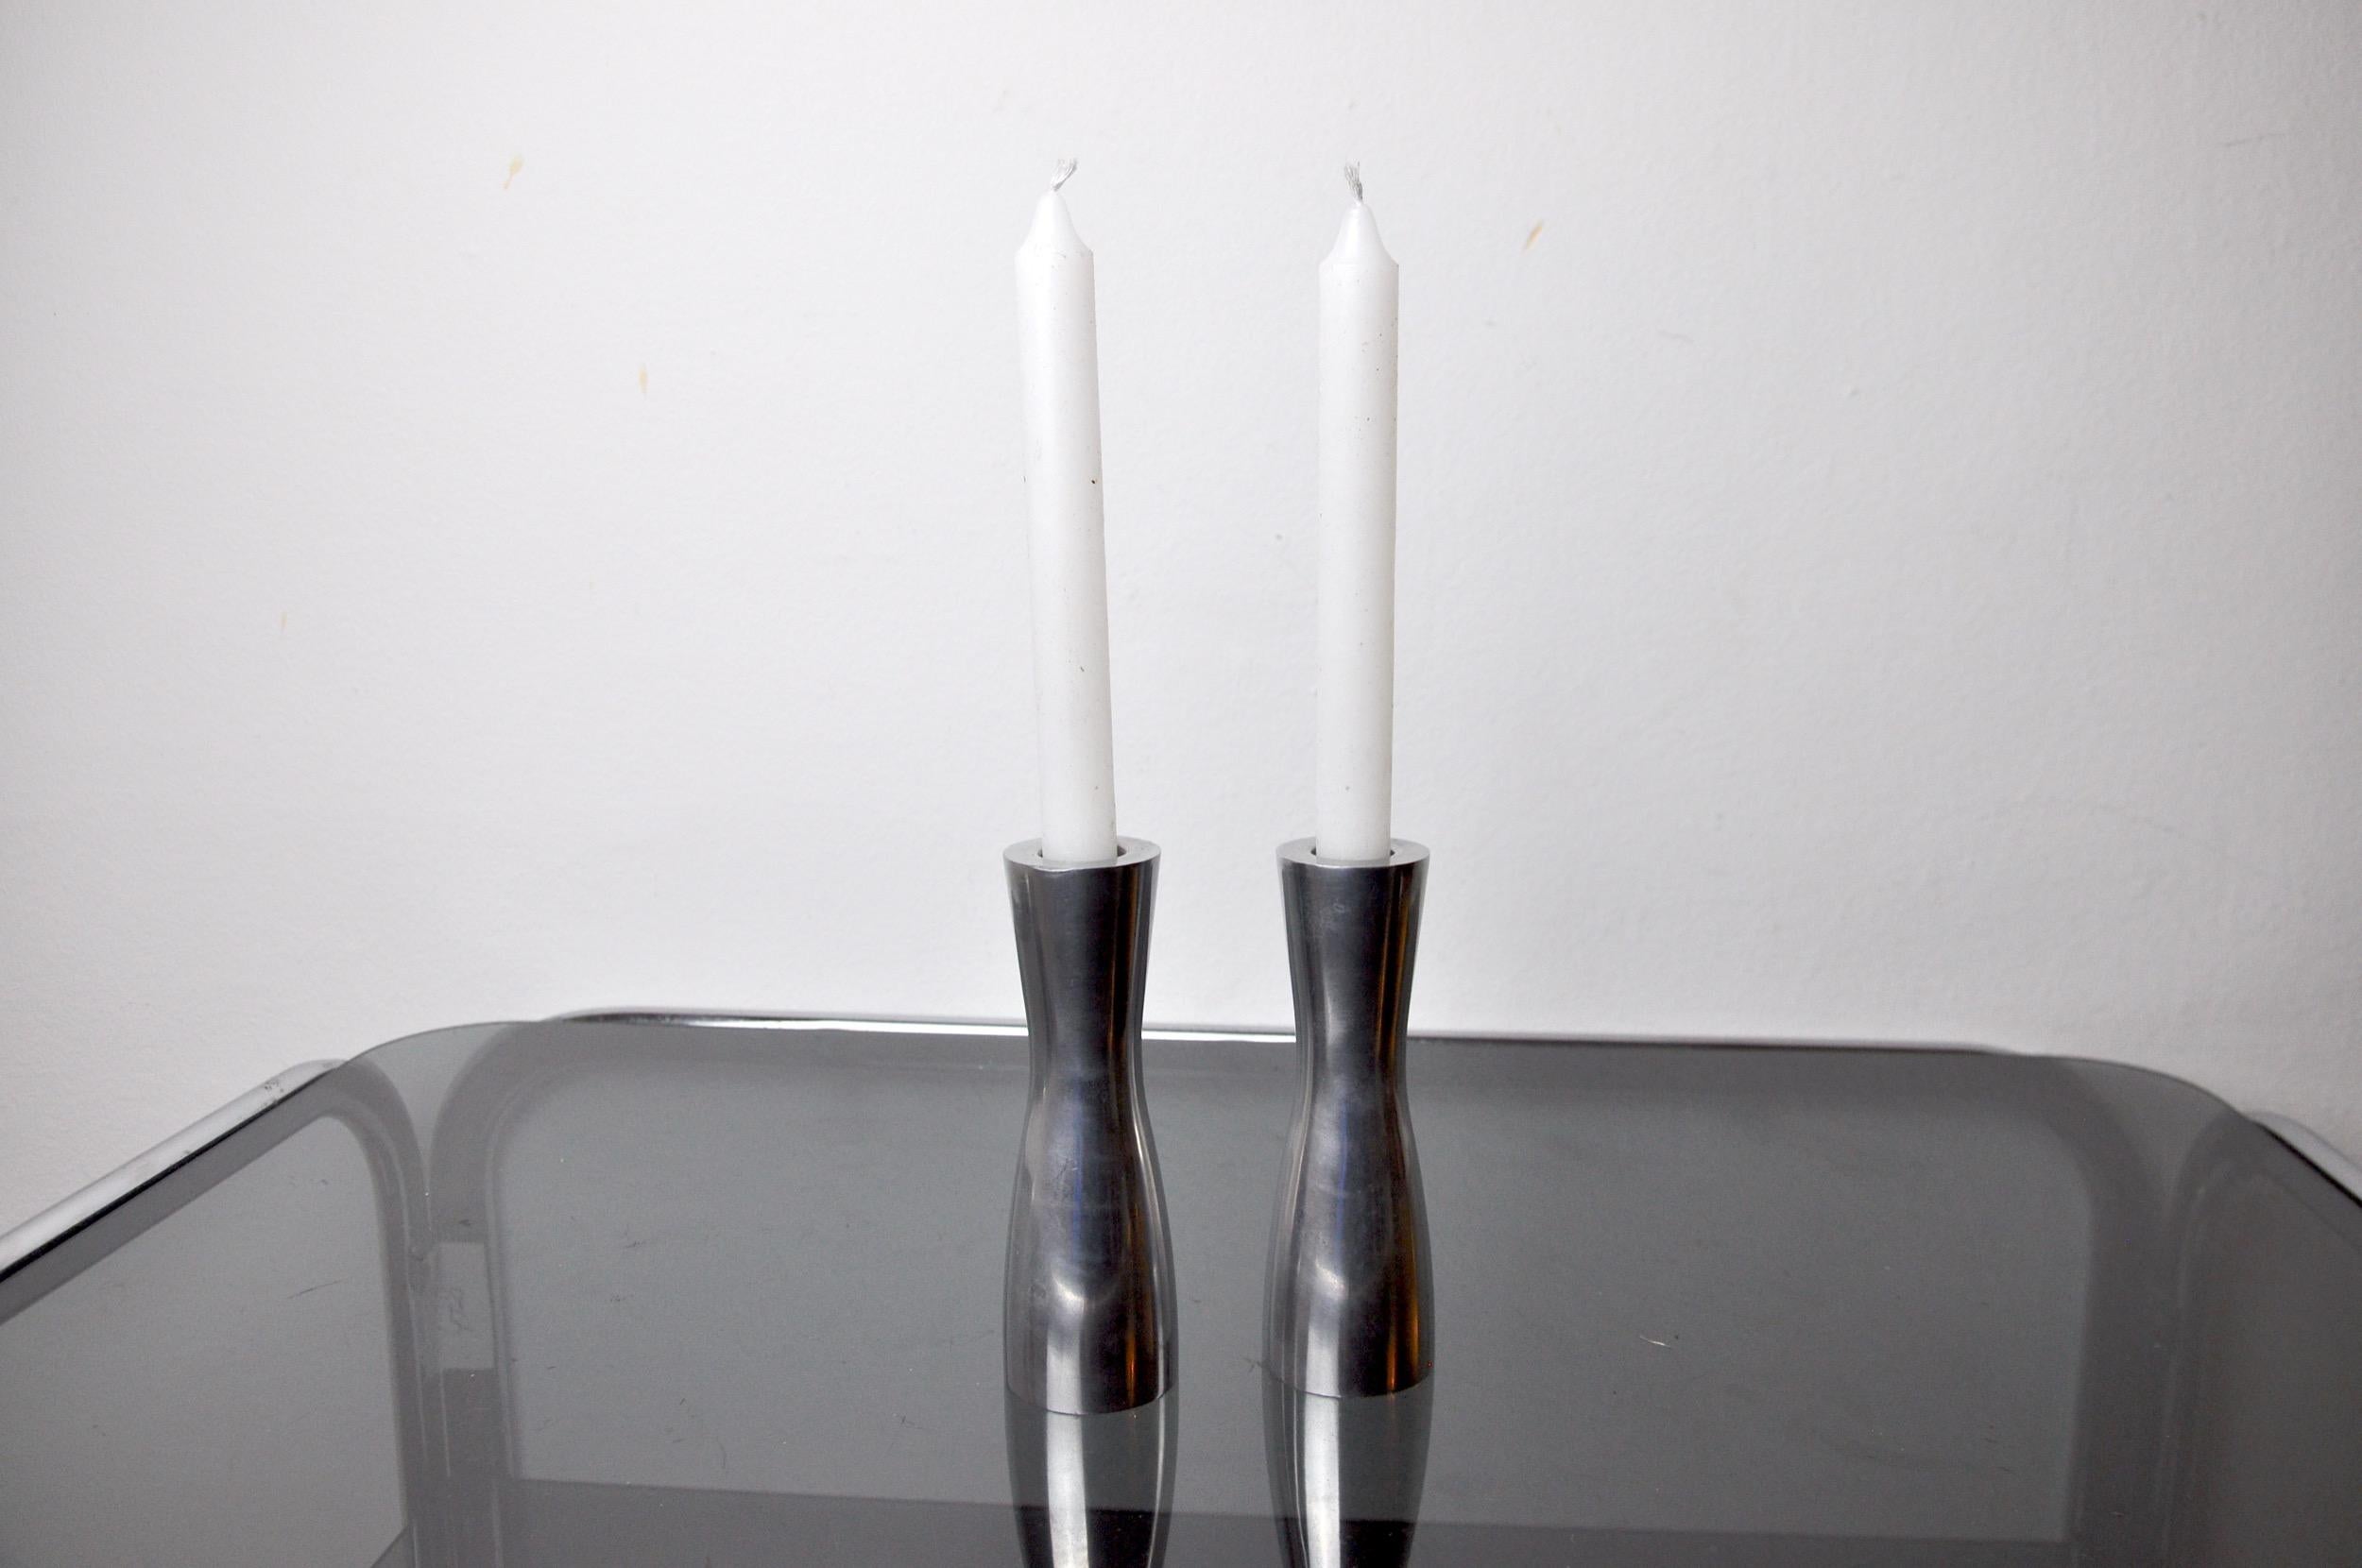 Very nice pair of abstract modernism candle holders, made of solid and heavy polished steel.

An elegant scandinavian design, conceived in the early 1990s by the famous designer erika pekkari.

Design objects that will perfectly decorate your